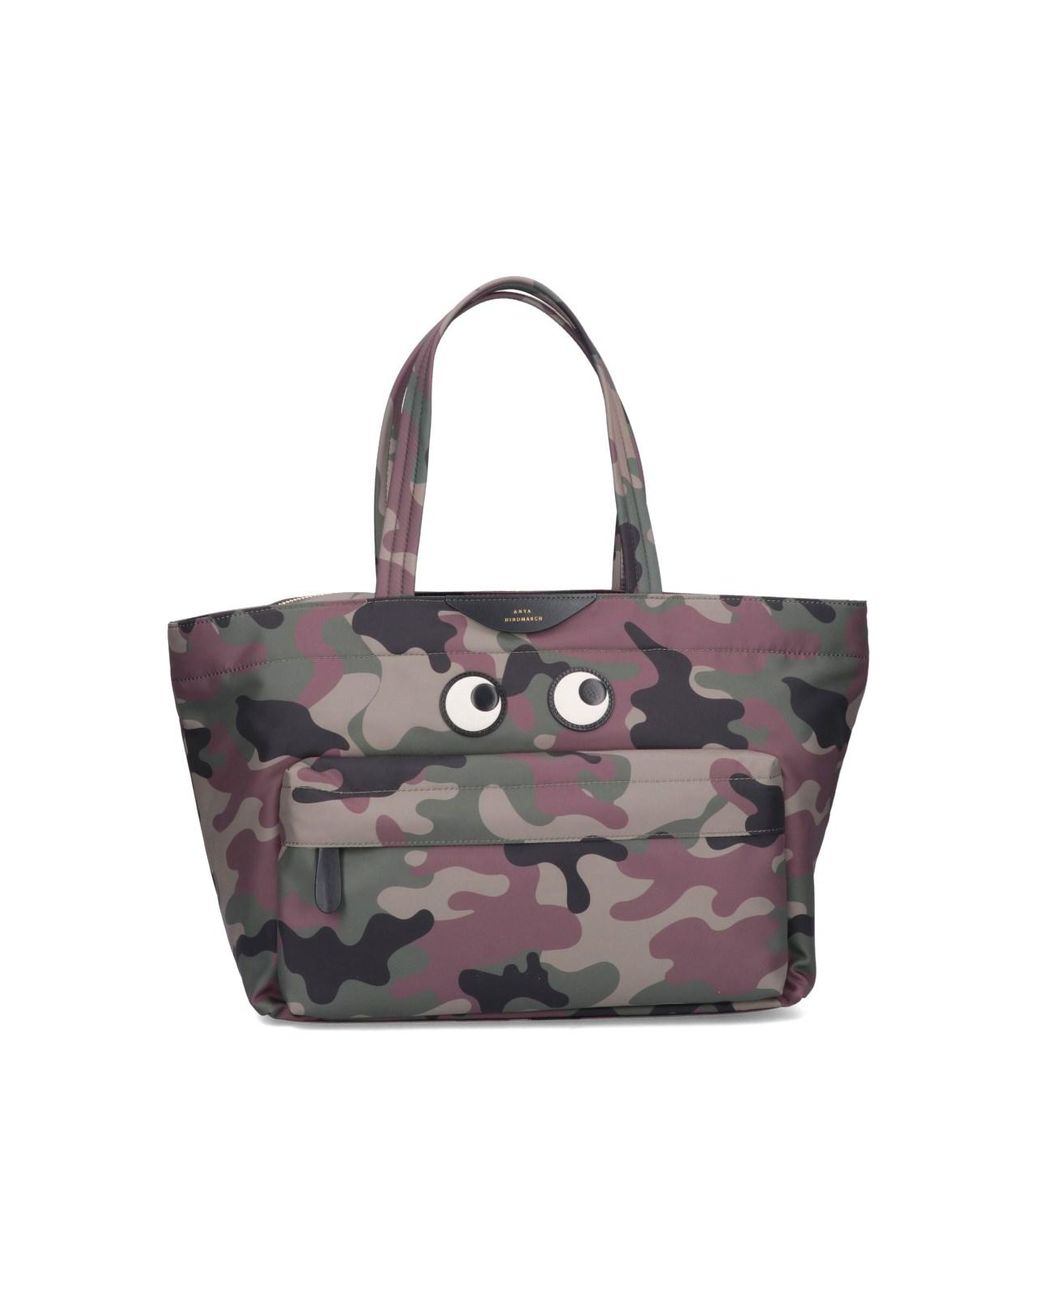 Anya Hindmarch 'eyes' Camouflage Tote Bag | Lyst